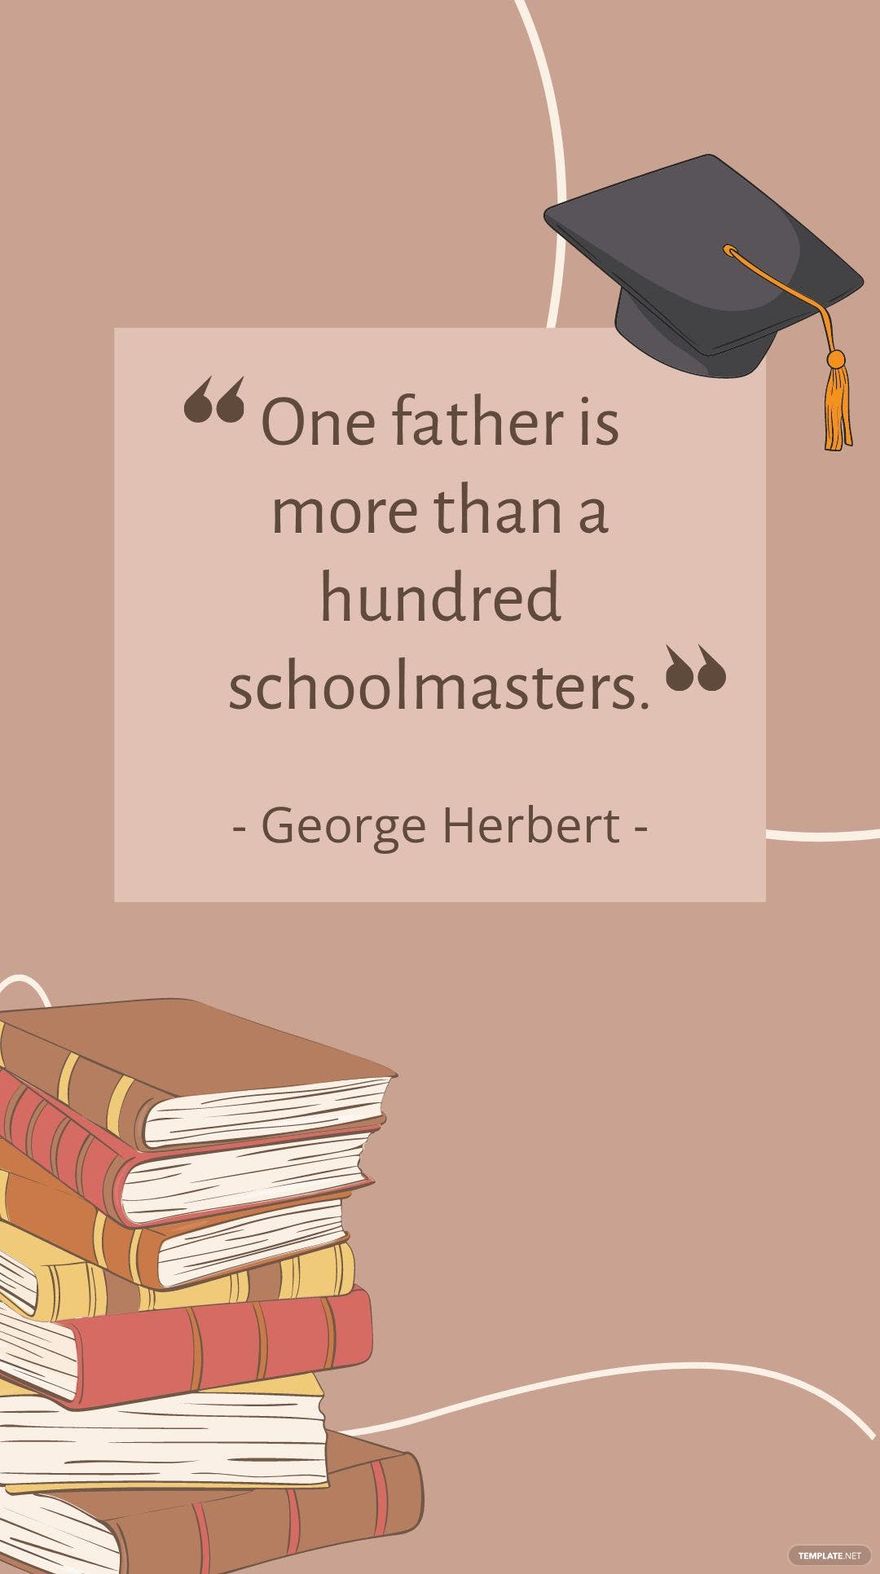 George Herbert - “One father is more than a hundred schoolmasters.”